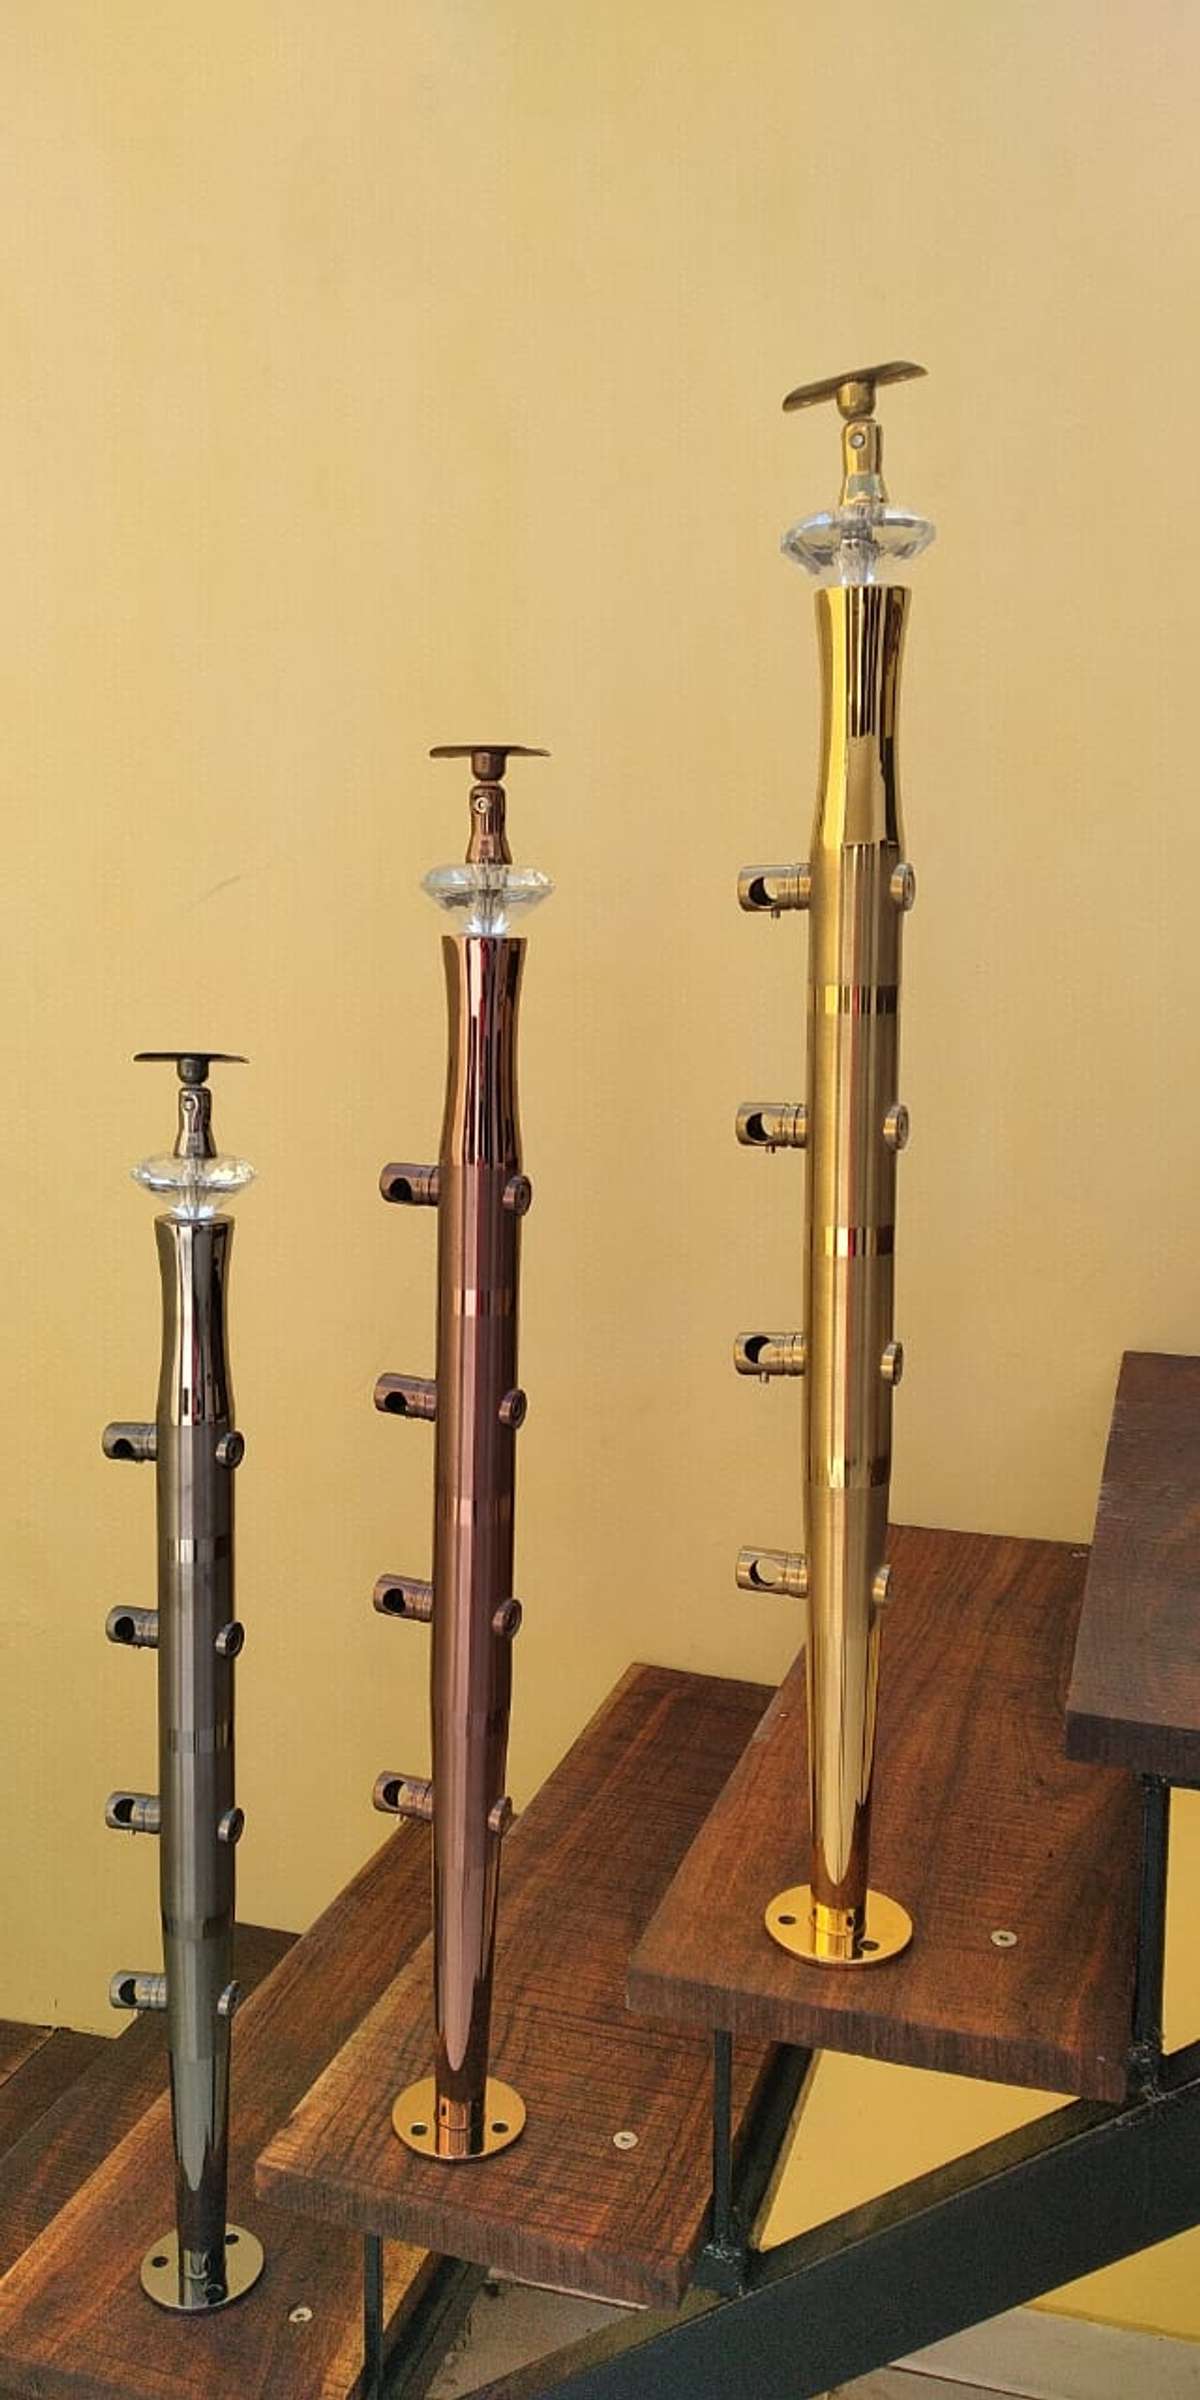 Royal designs,balusters,master posts,pipes and fittings all in rusty/gold,gold or in rose gold colors. #handrailsforkings